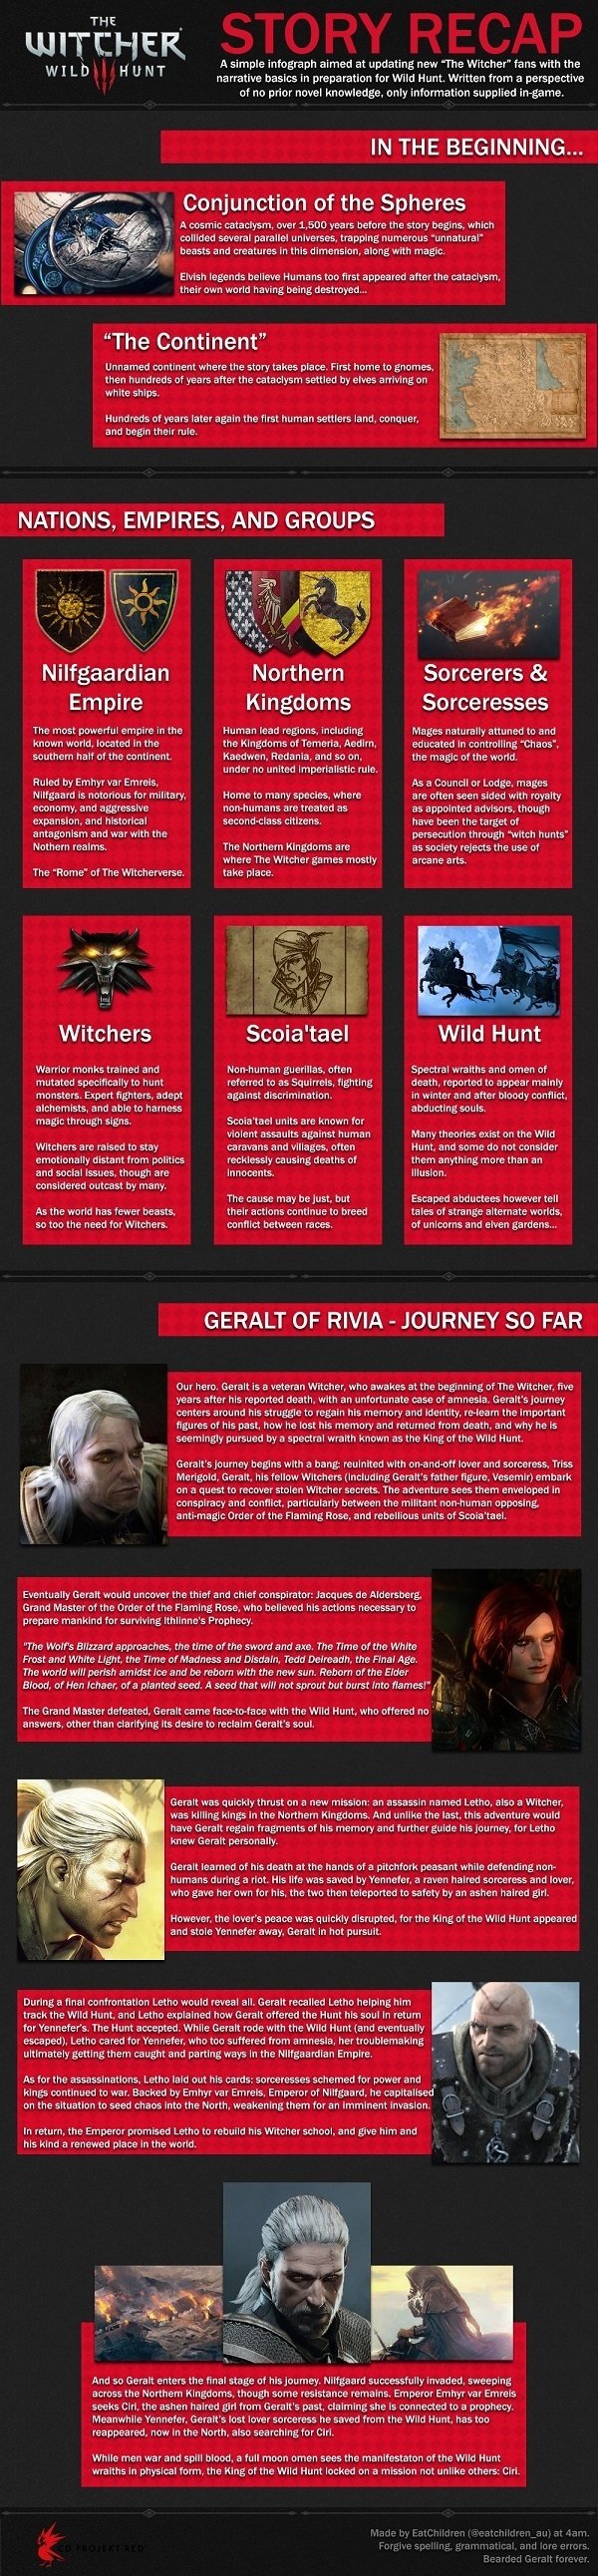 witcherinfographic small